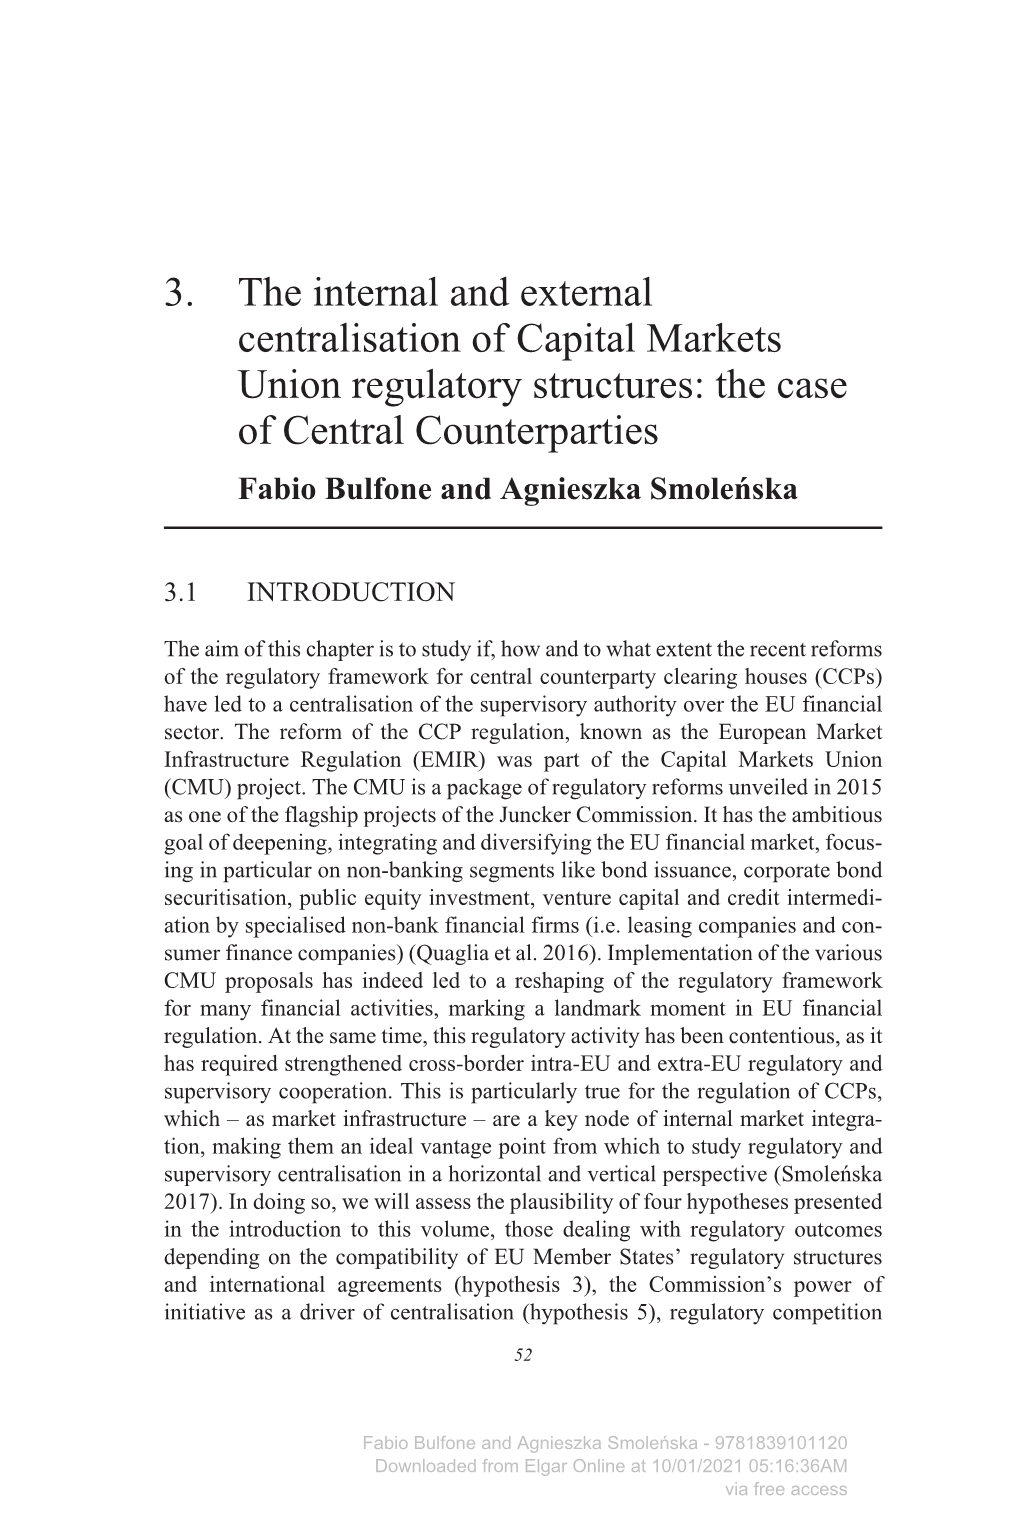 3. the Internal and External Centralisation of Capital Markets Union Regulatory Structures: the Case of Central Counterparties Fabio Bulfone and Agnieszka Smoleńska